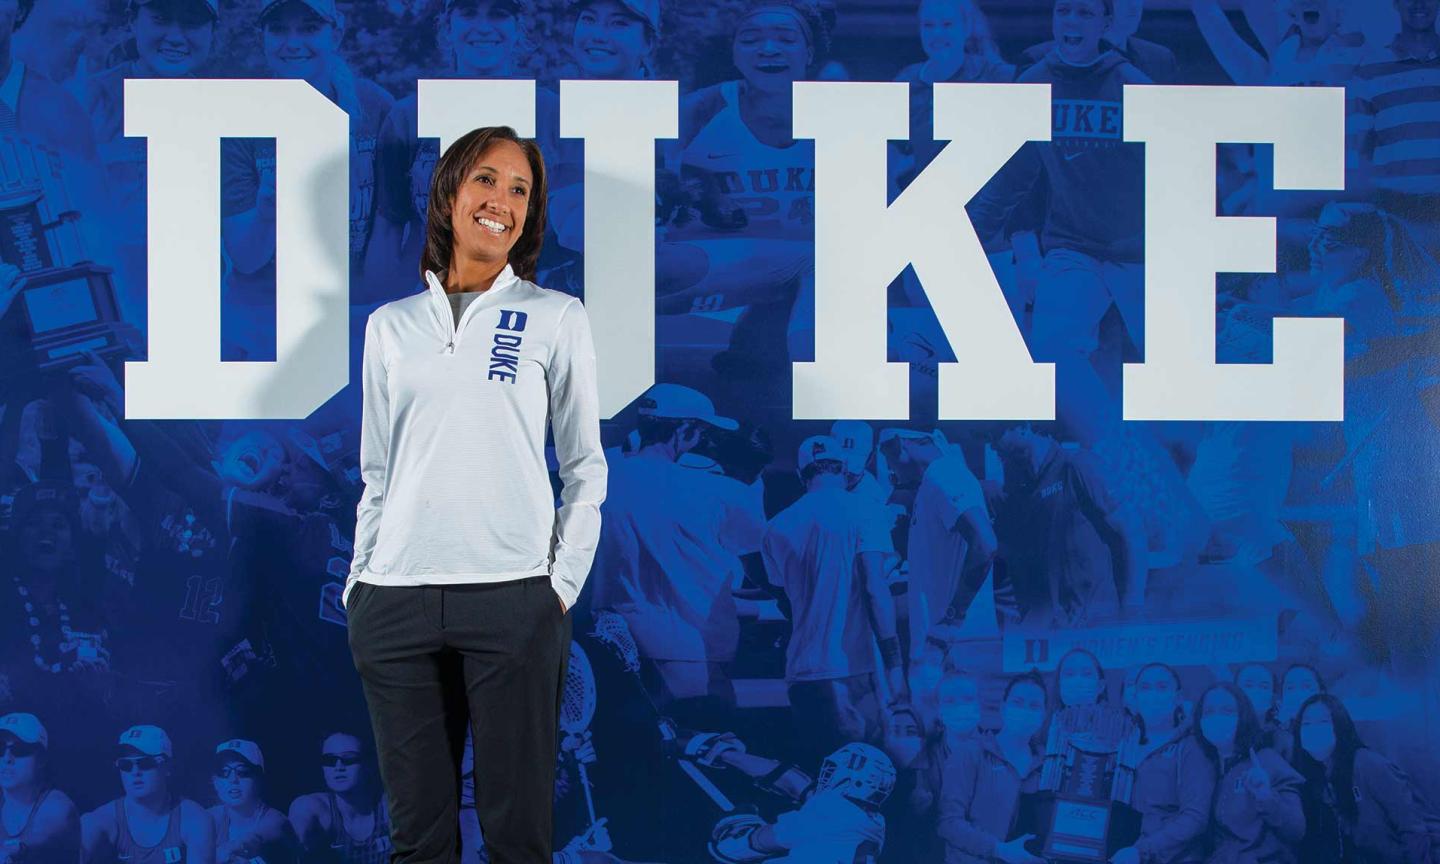 Just outside King’s office stretches a mural collaging moments in Duke Athletics history.